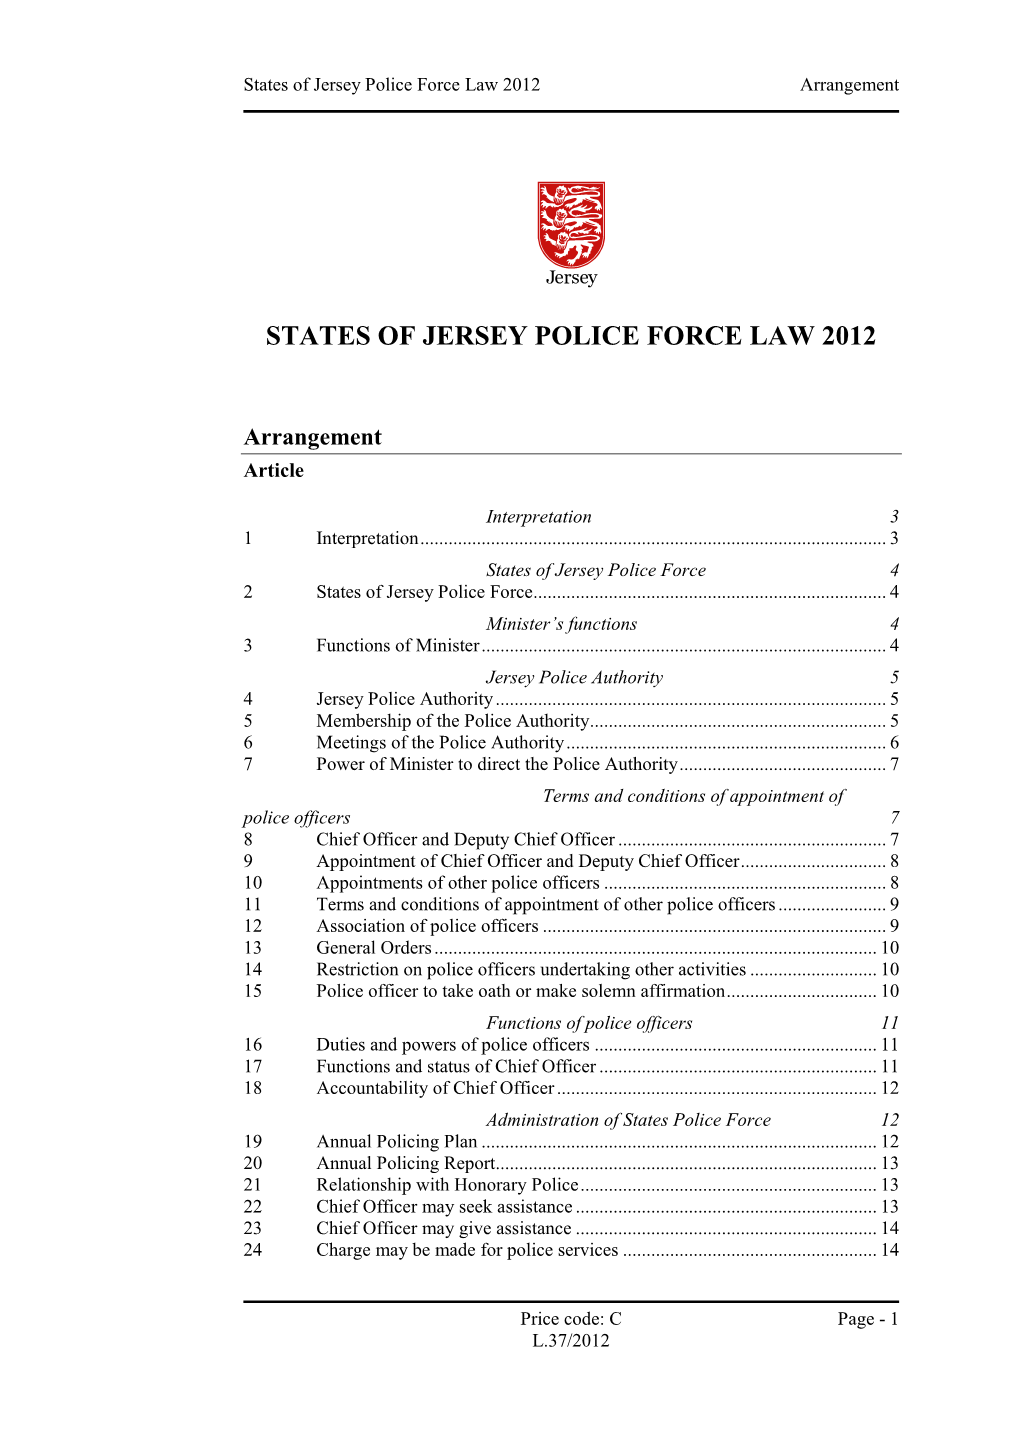 States of Jersey Police Force Law 2012 Arrangement